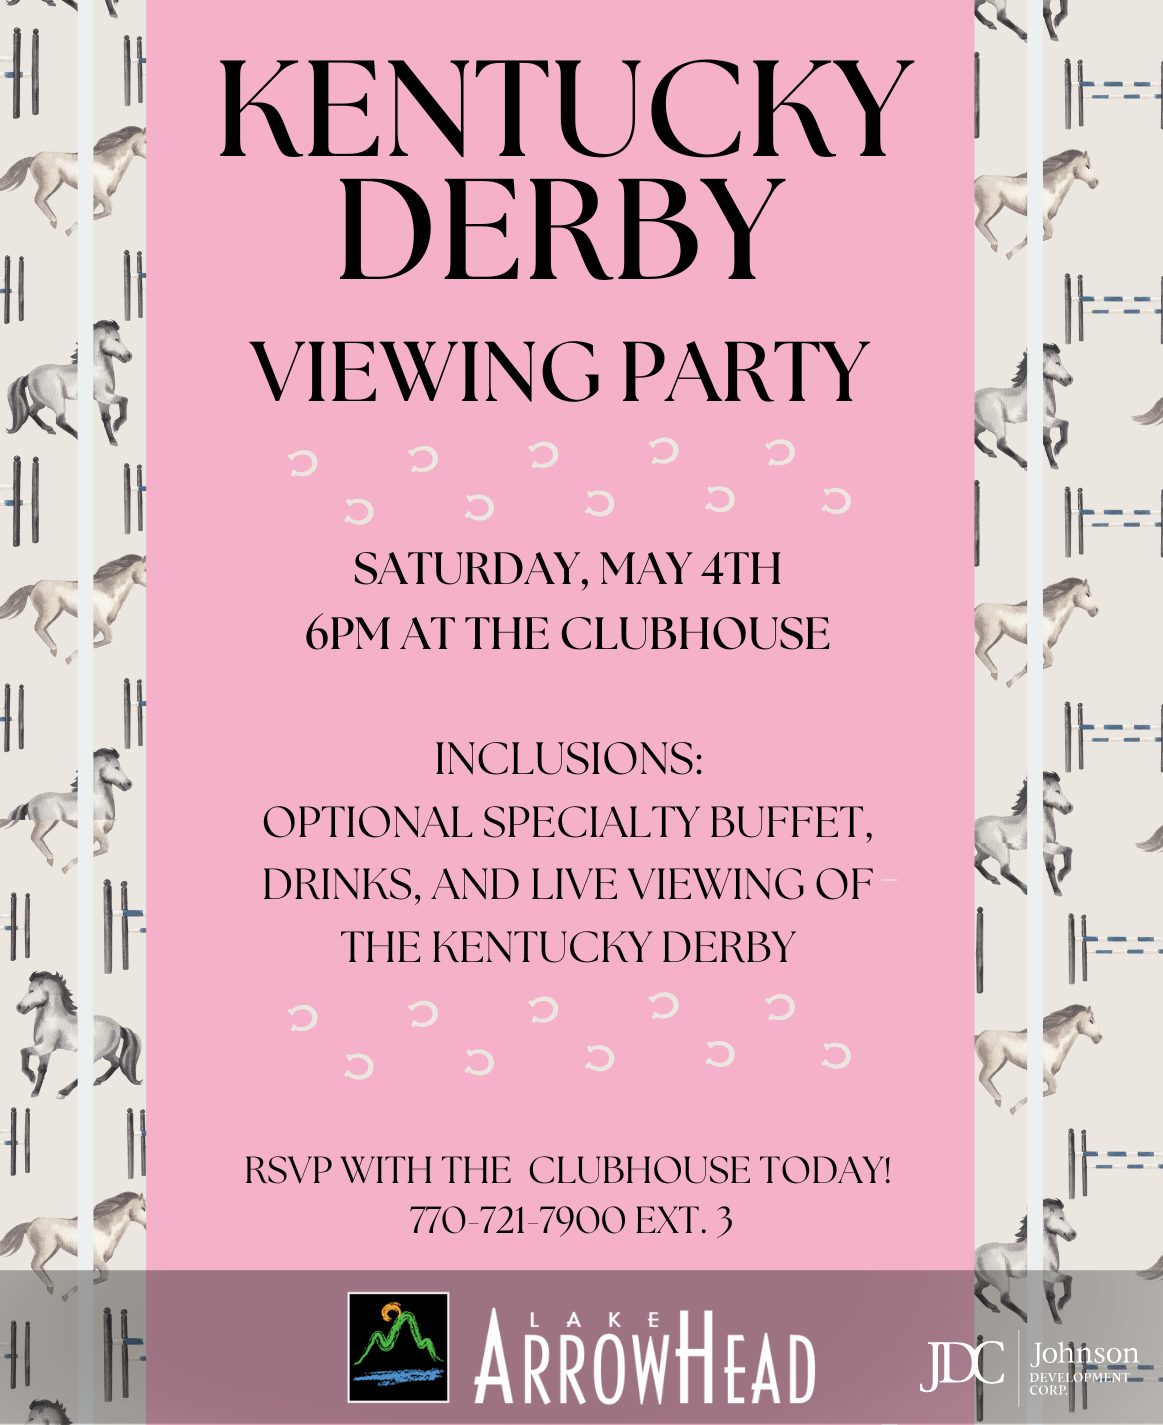 Kentucky Derby Viewing Party May 4th